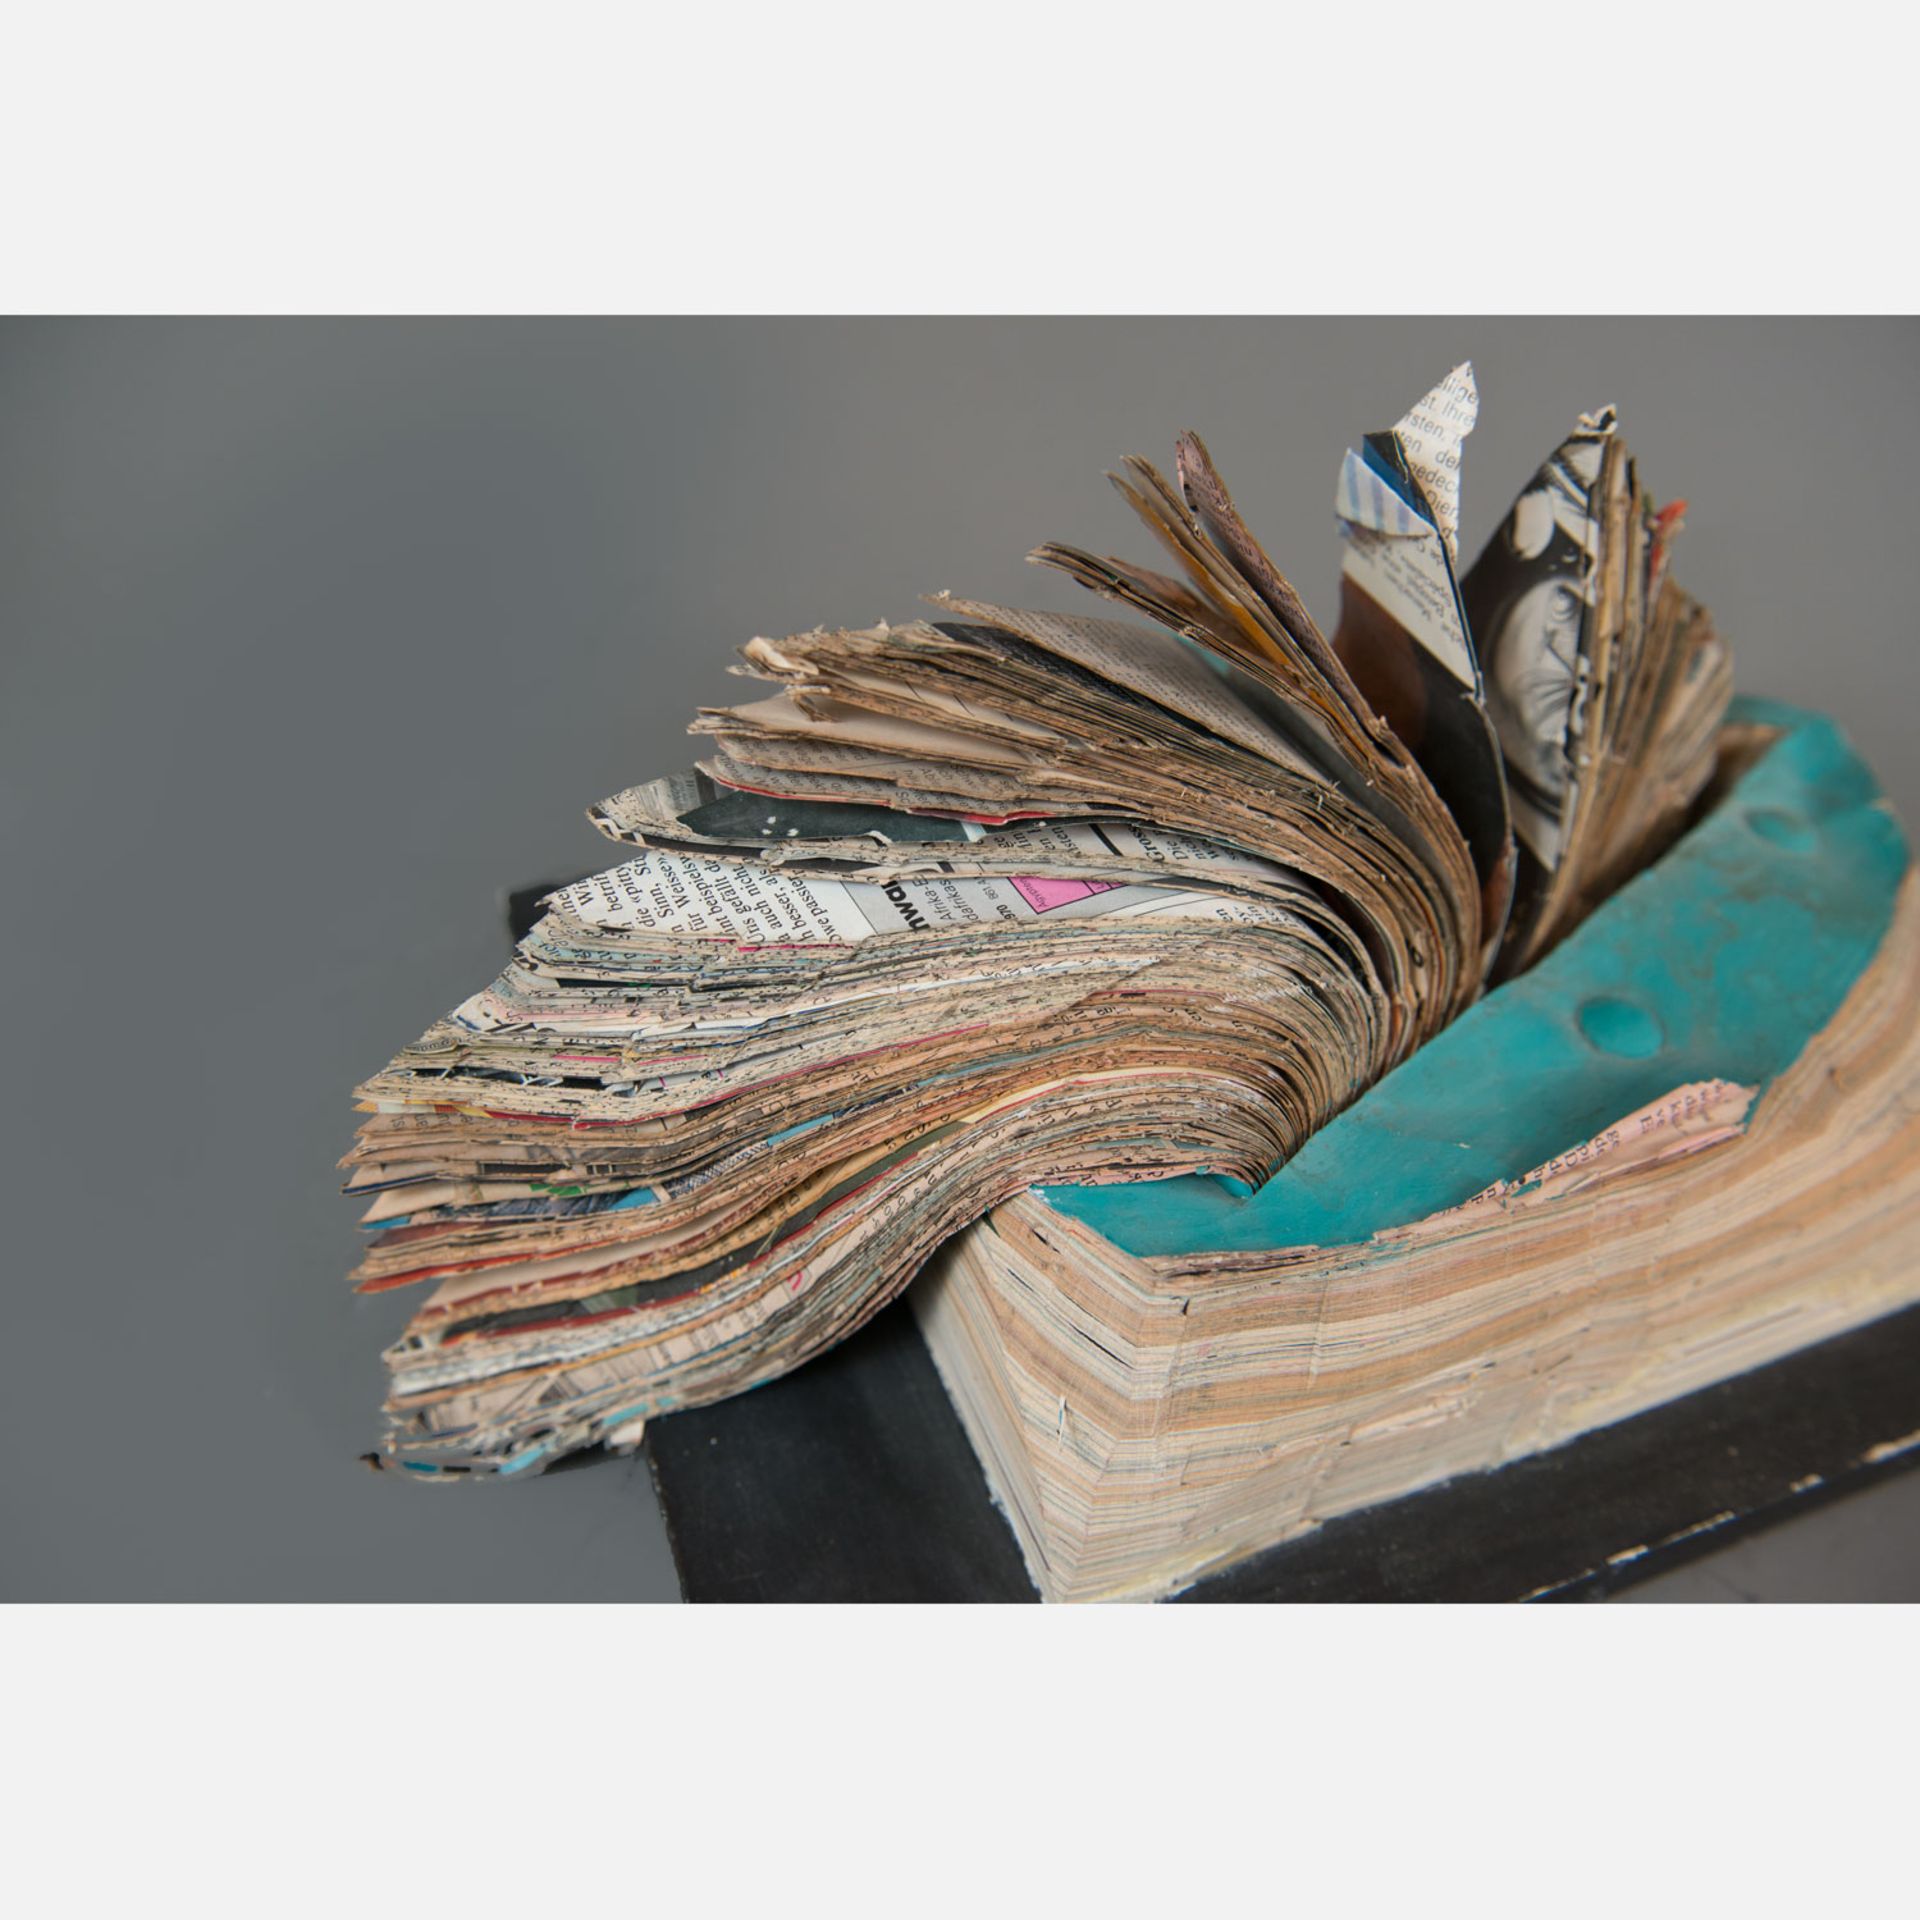 Book Sculpture - Image 3 of 3